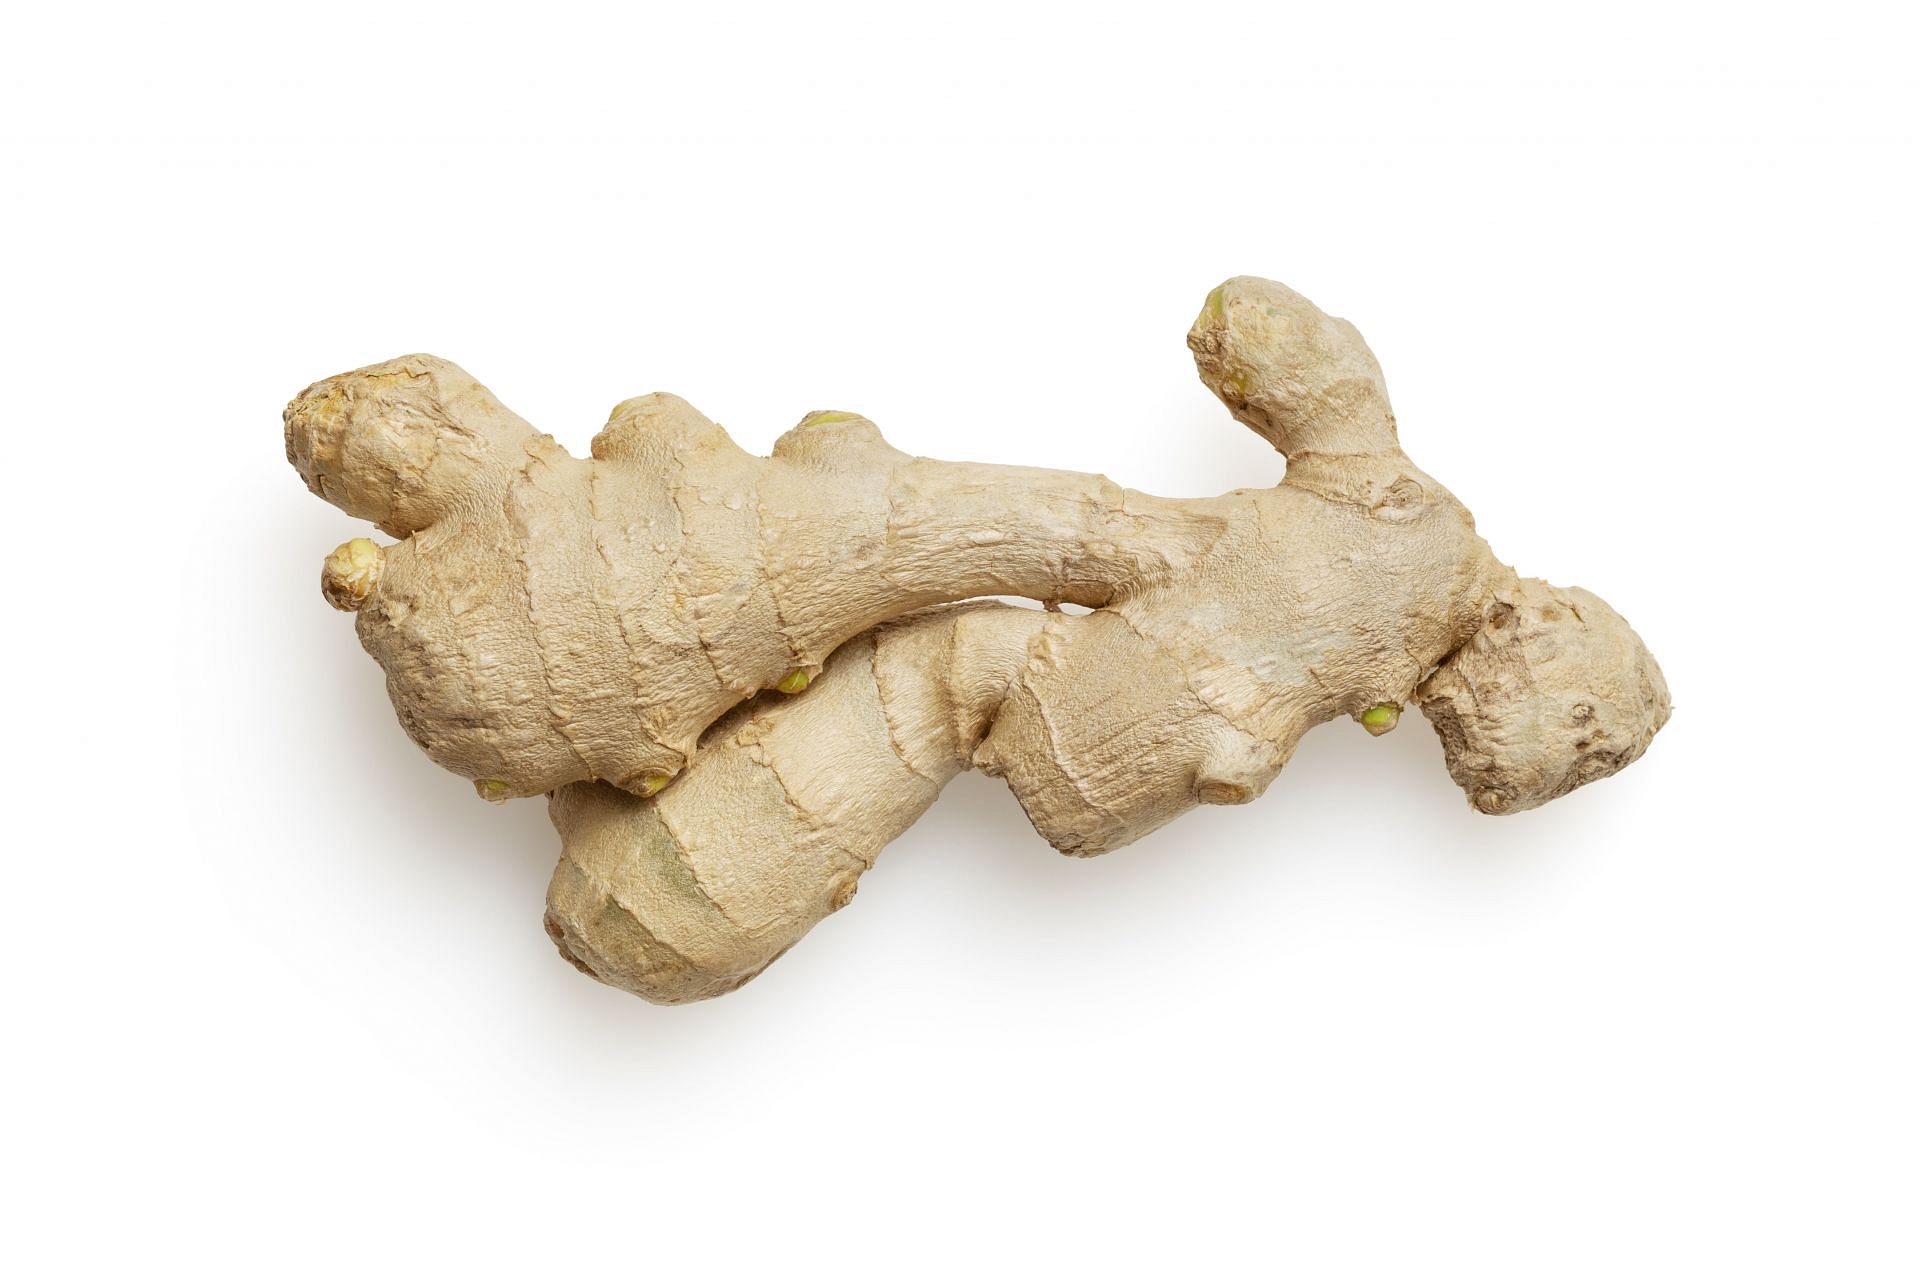 Ginger might provide temporary relief from nausea in mild cases. (Image via Unsplash/Mockup Graphics)